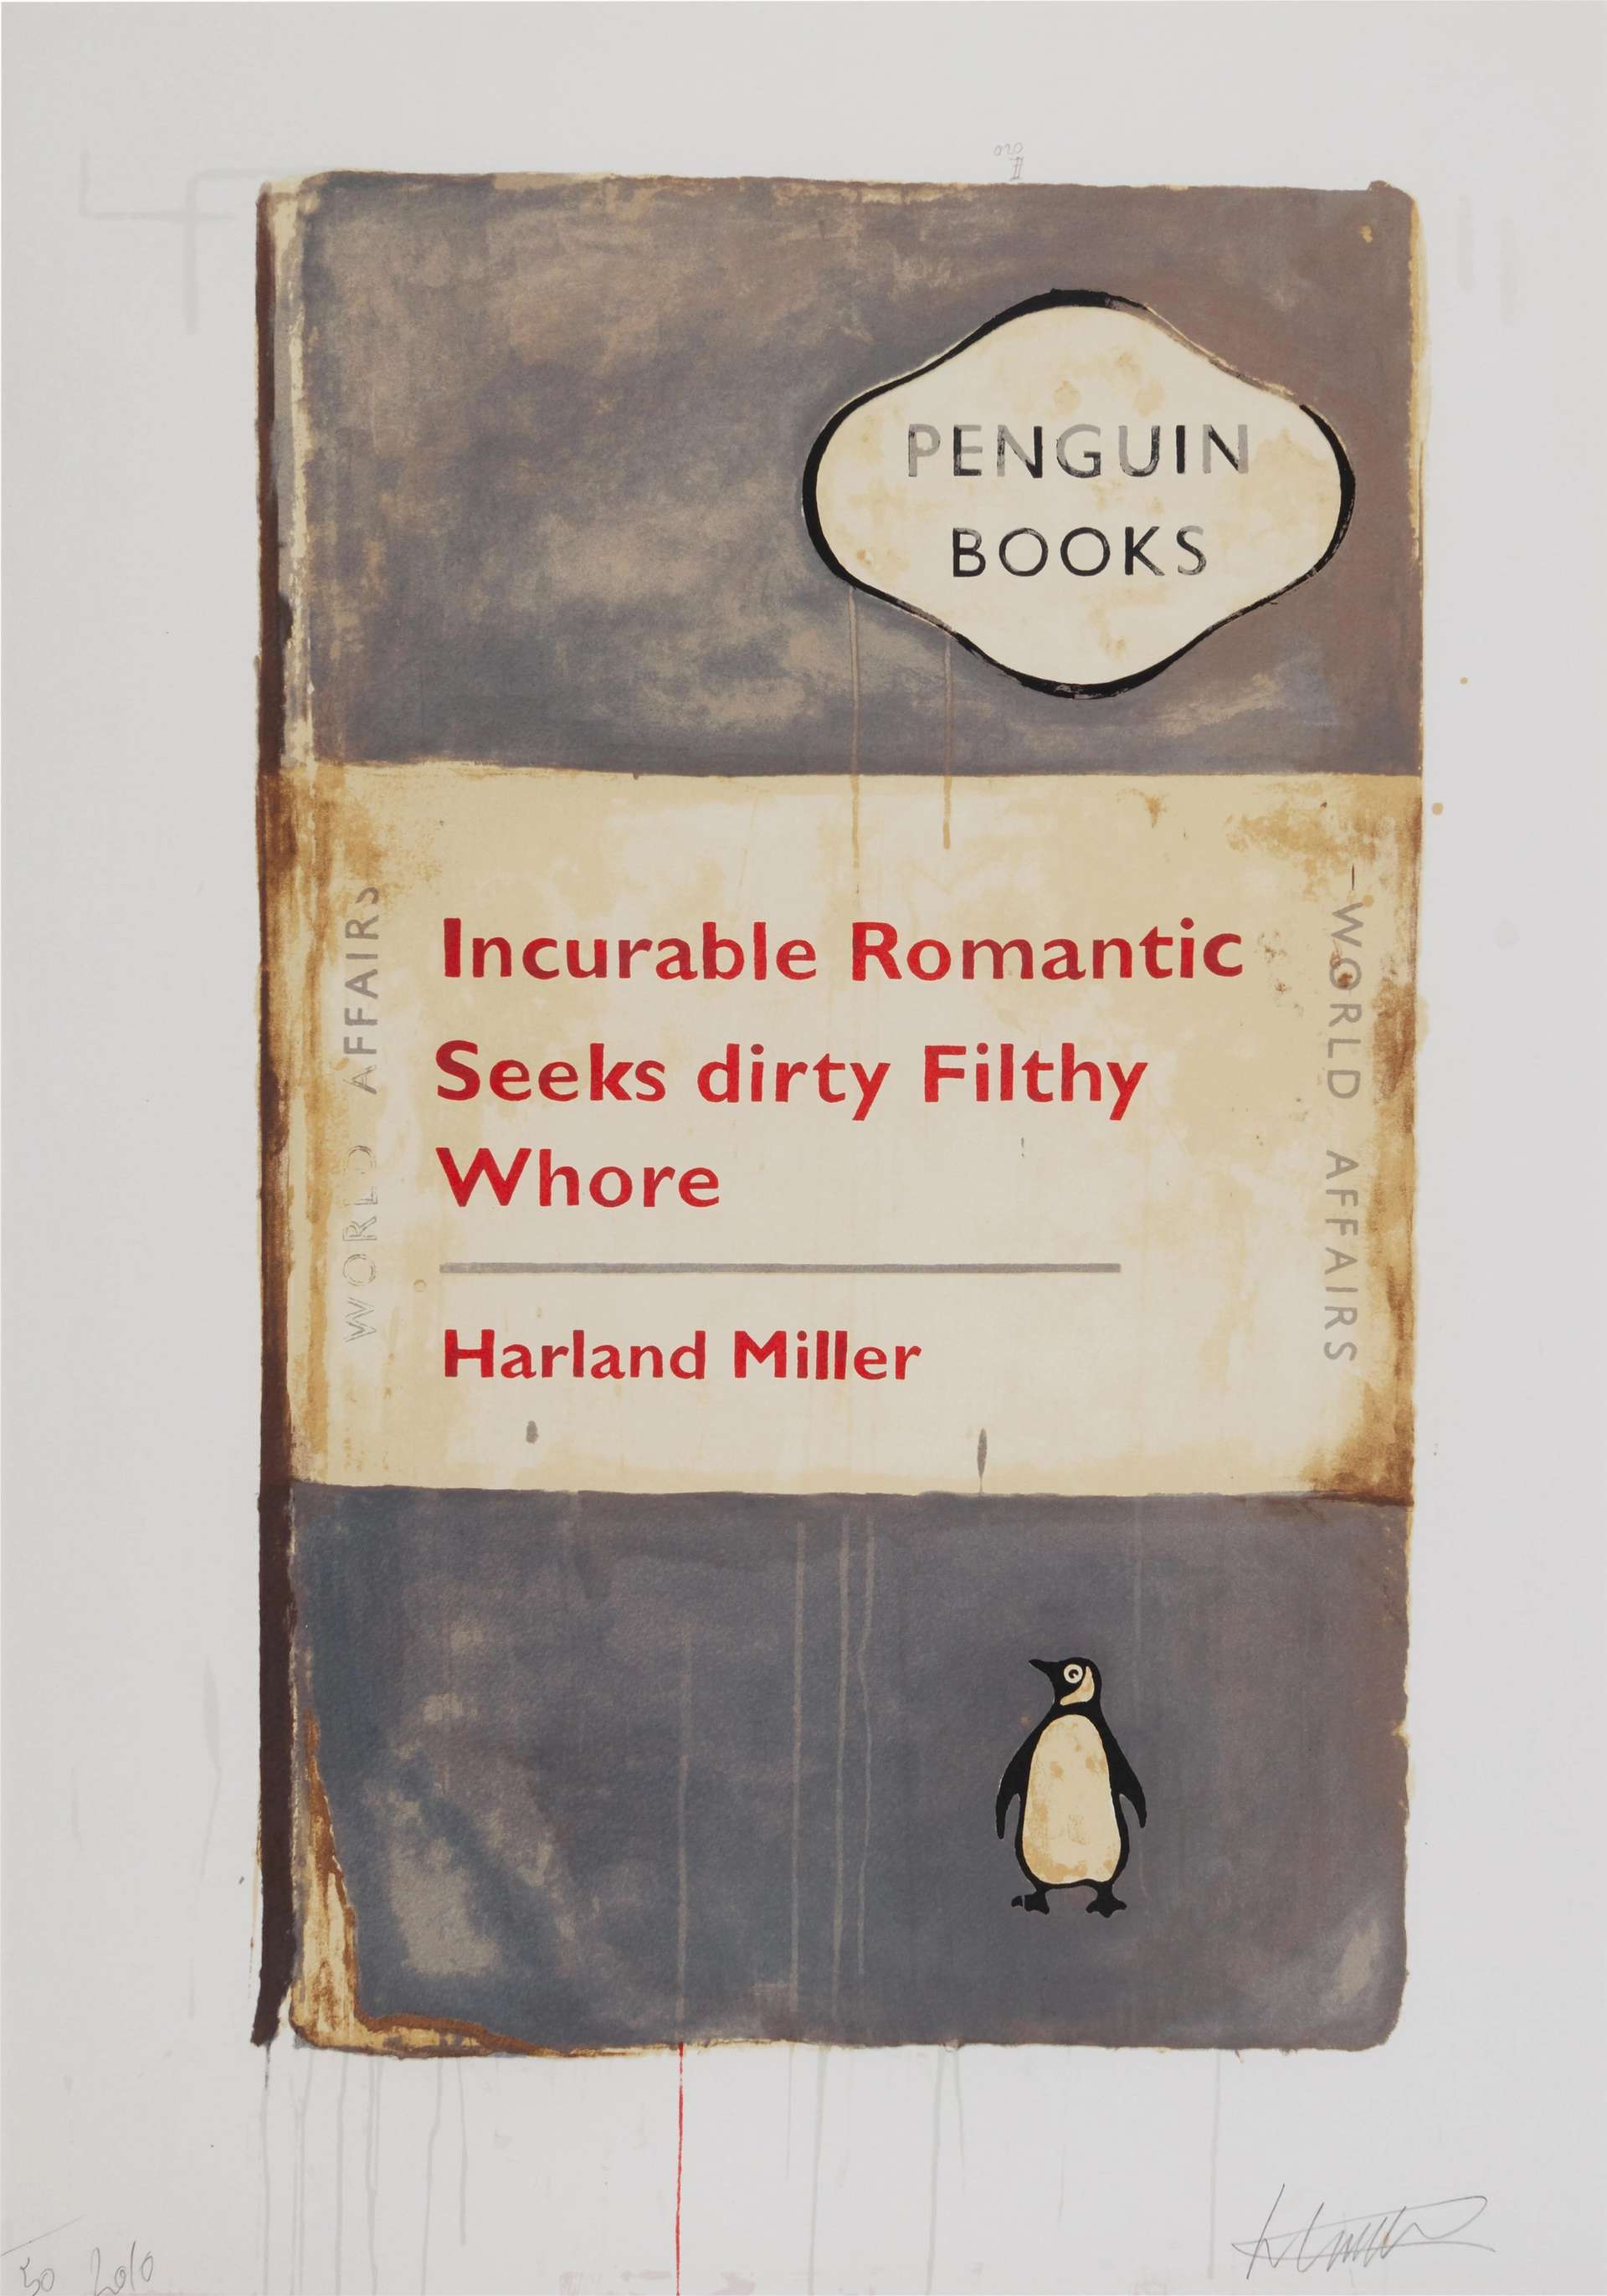  An old-looking blue book cover that reads “Incurable Romantic Seeks Dirty Whore”